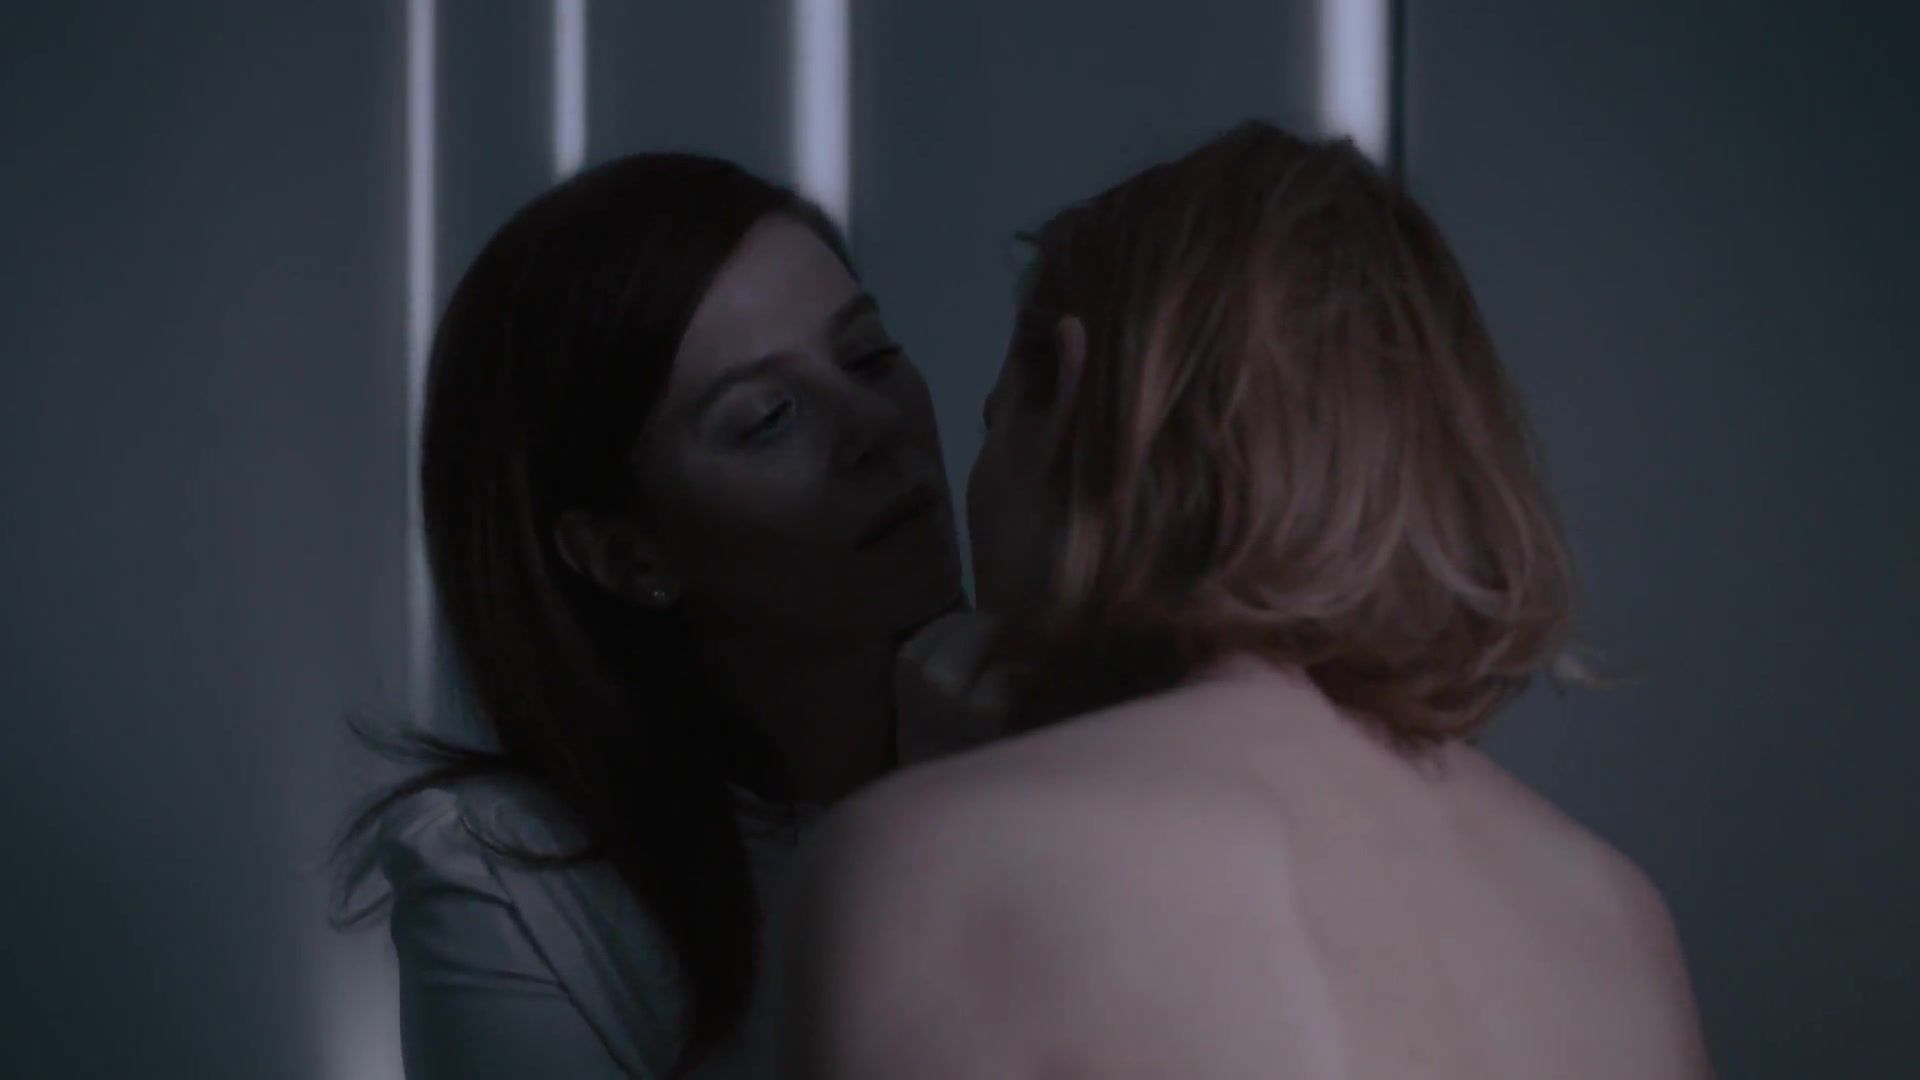 RabbitsCams Louisa Krause, Anna Friel nude – The Girlfriend Experience S02E07 (Explicit Blowjob and Lesbian Sex) Putinha - 1